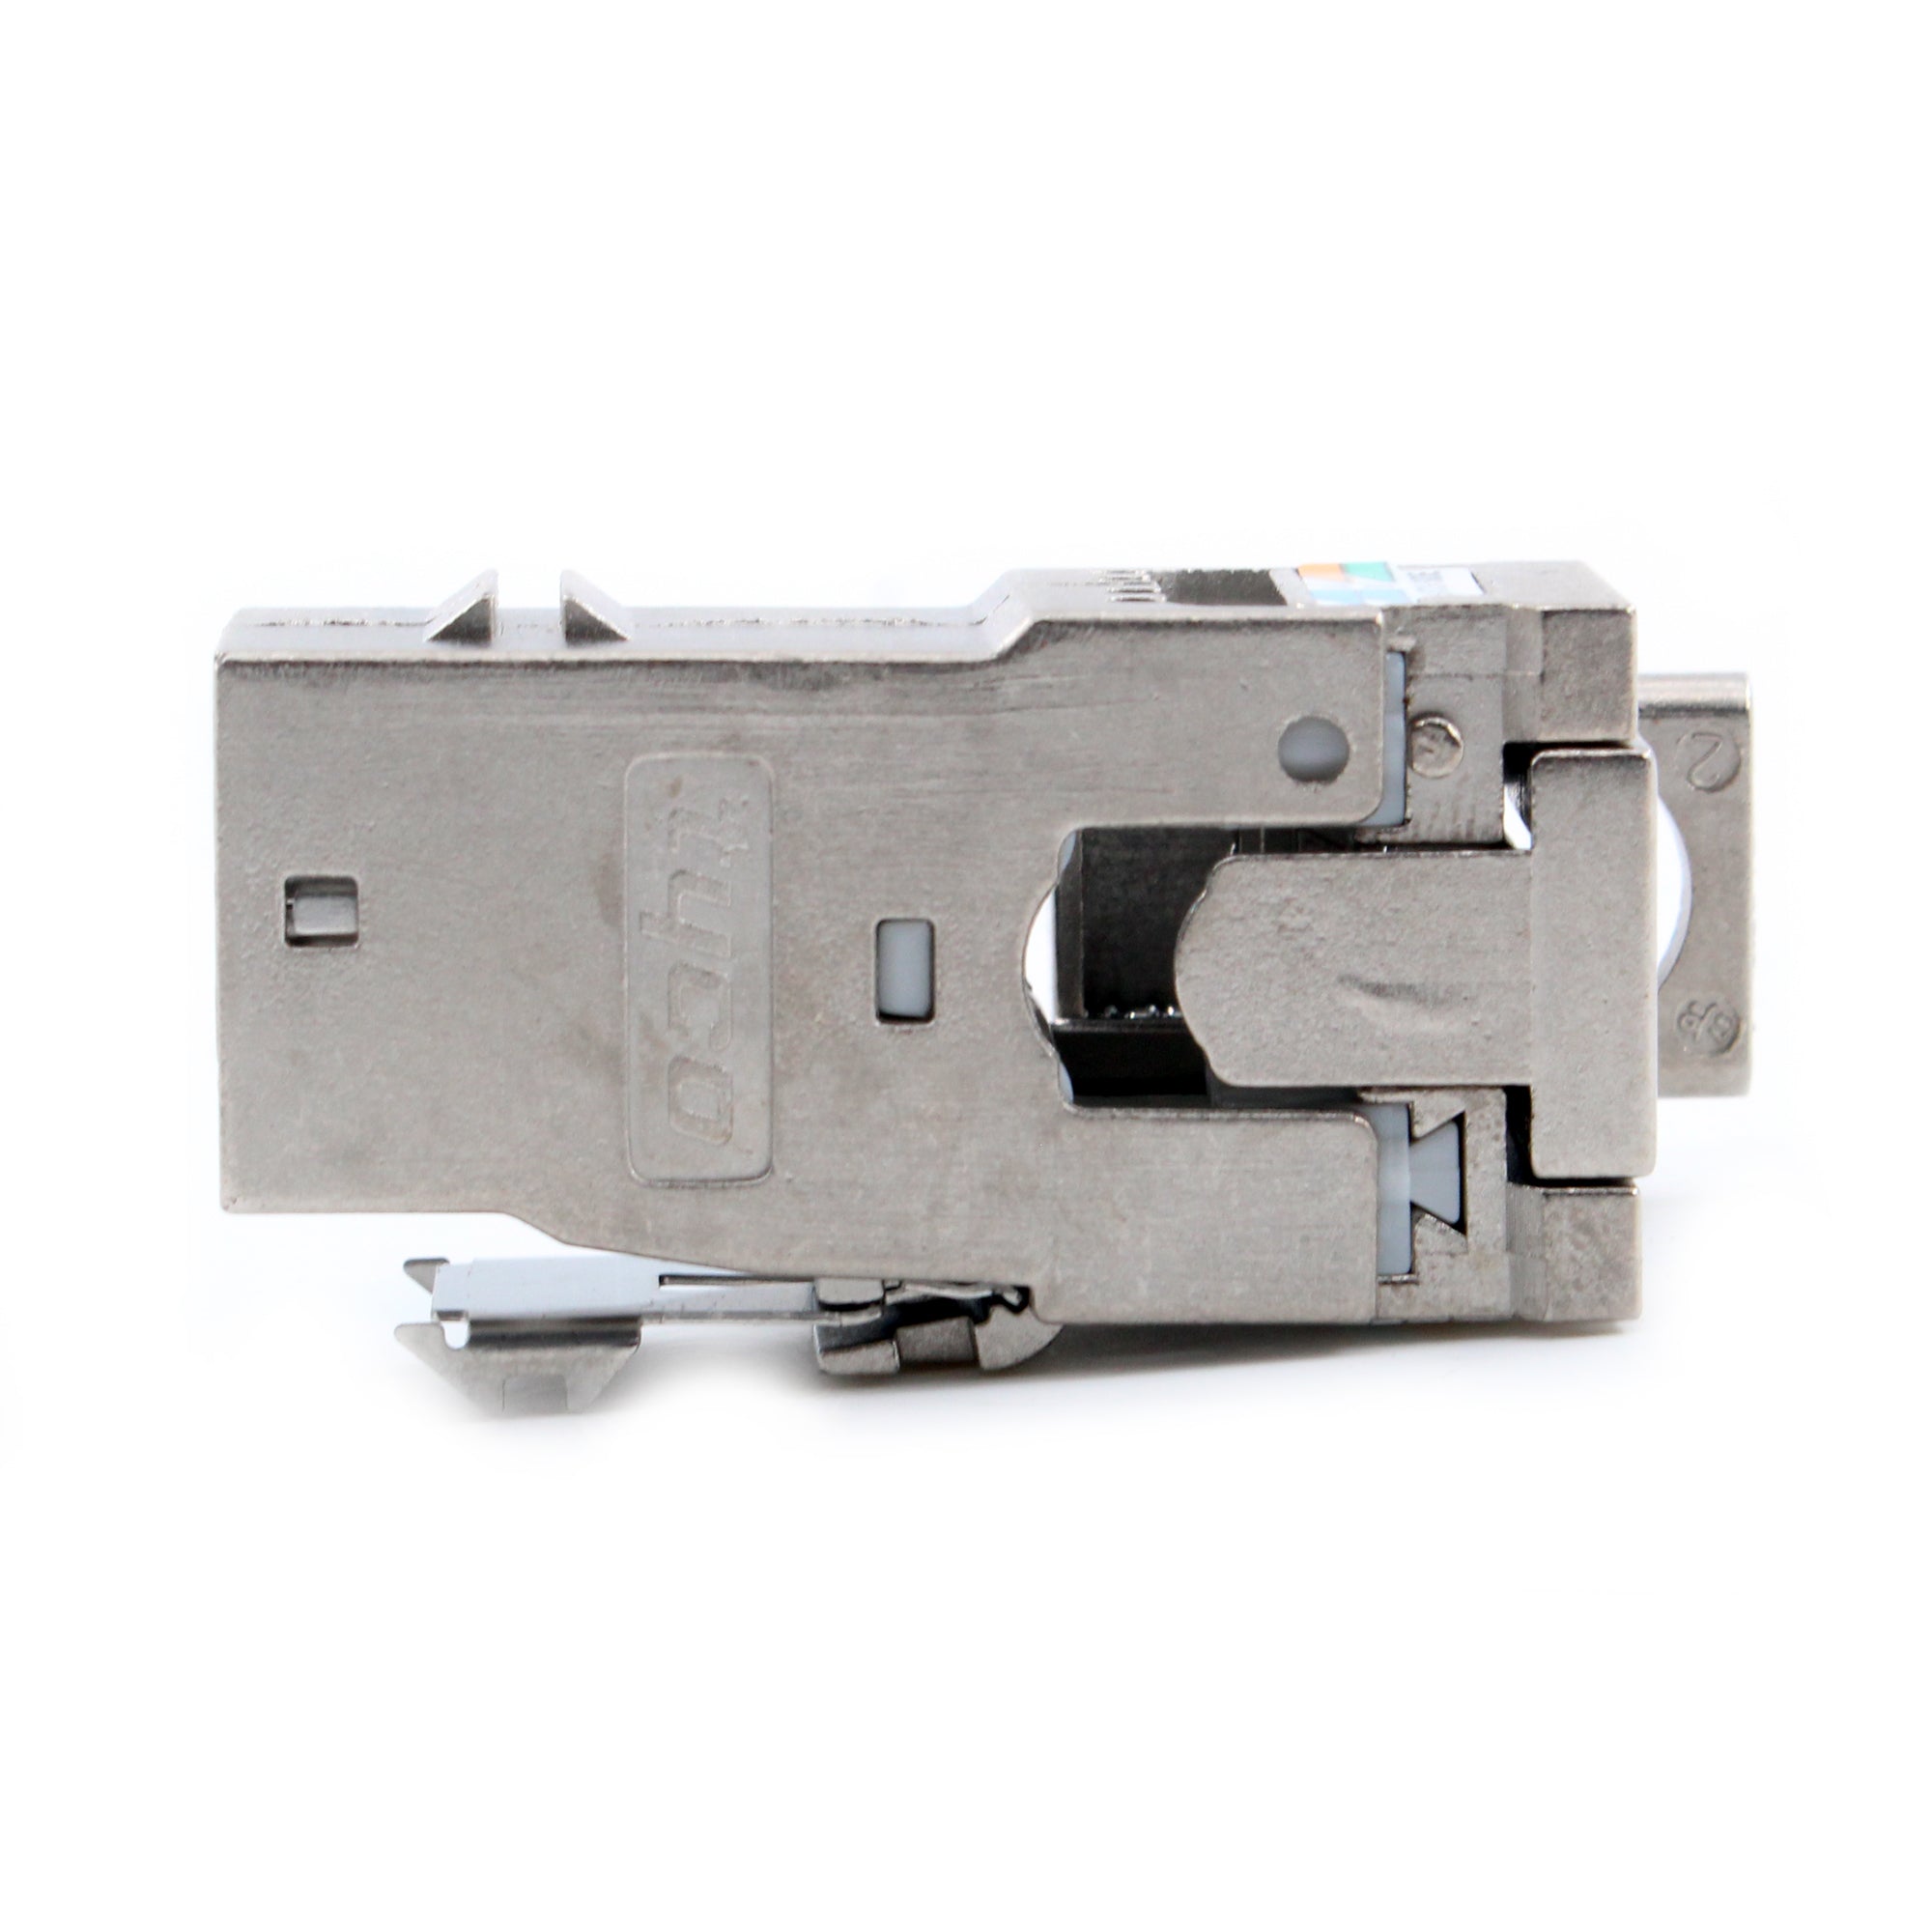 Amp / Tyco Electronics, AMP TYCO TE 1711343-1 SL-SERIES F/UPT SHIELDED XG CAT6A MODULAR JACK, DUST-COVER